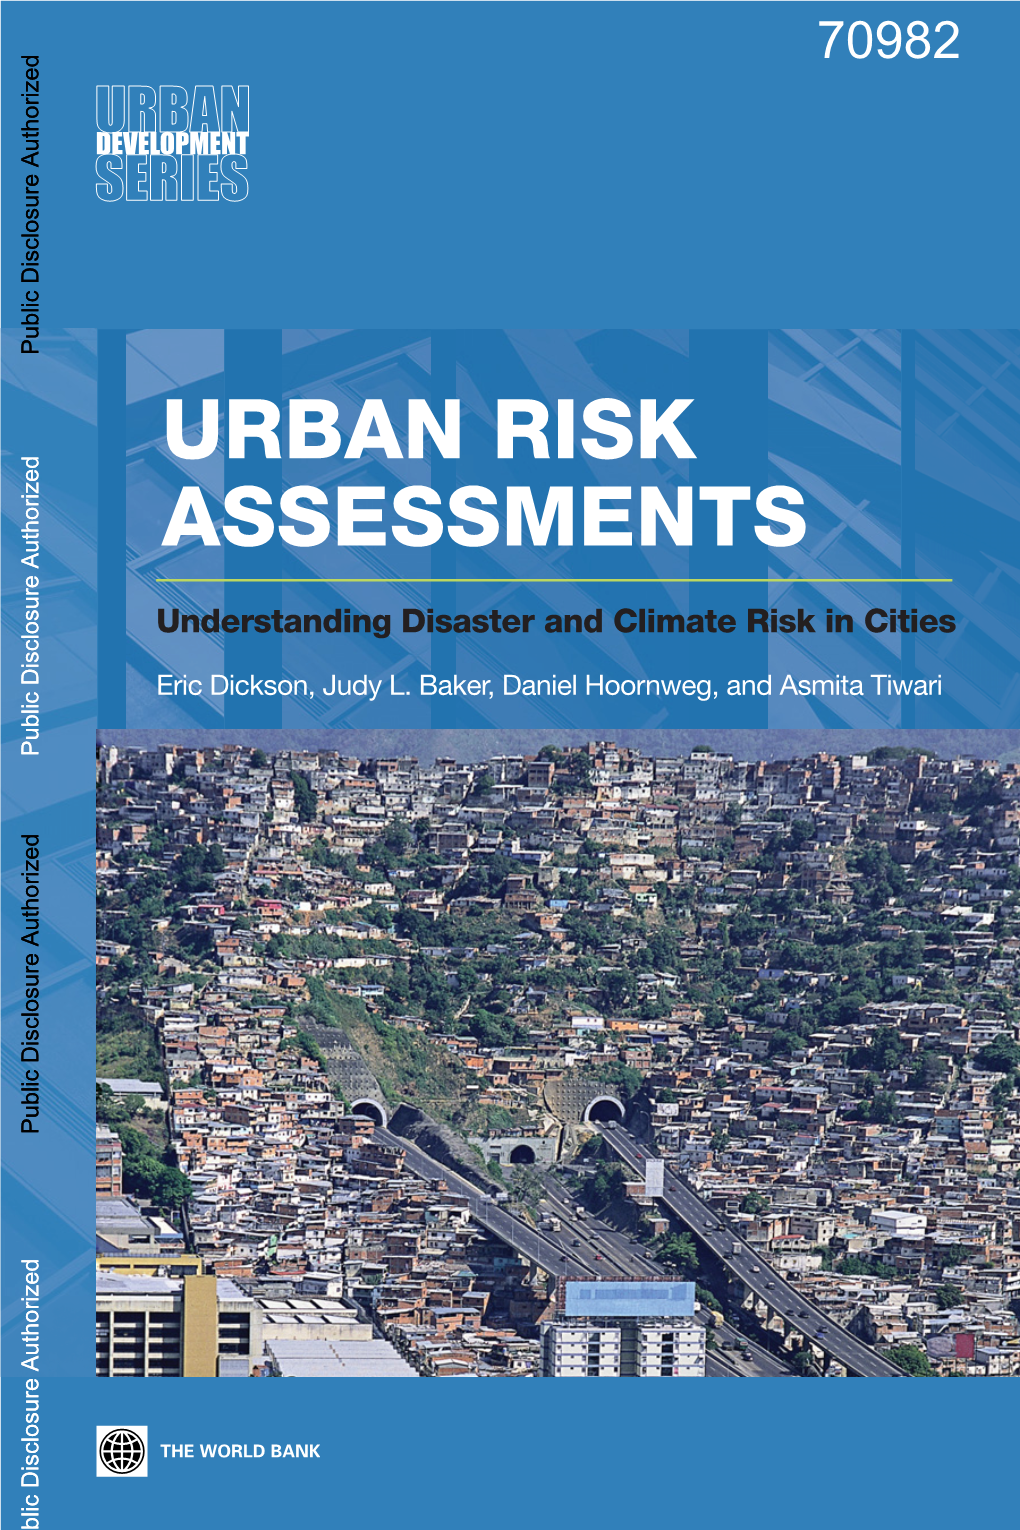 Urban Risk Assessments: Understanding Disaster and Climate Risk in Cities